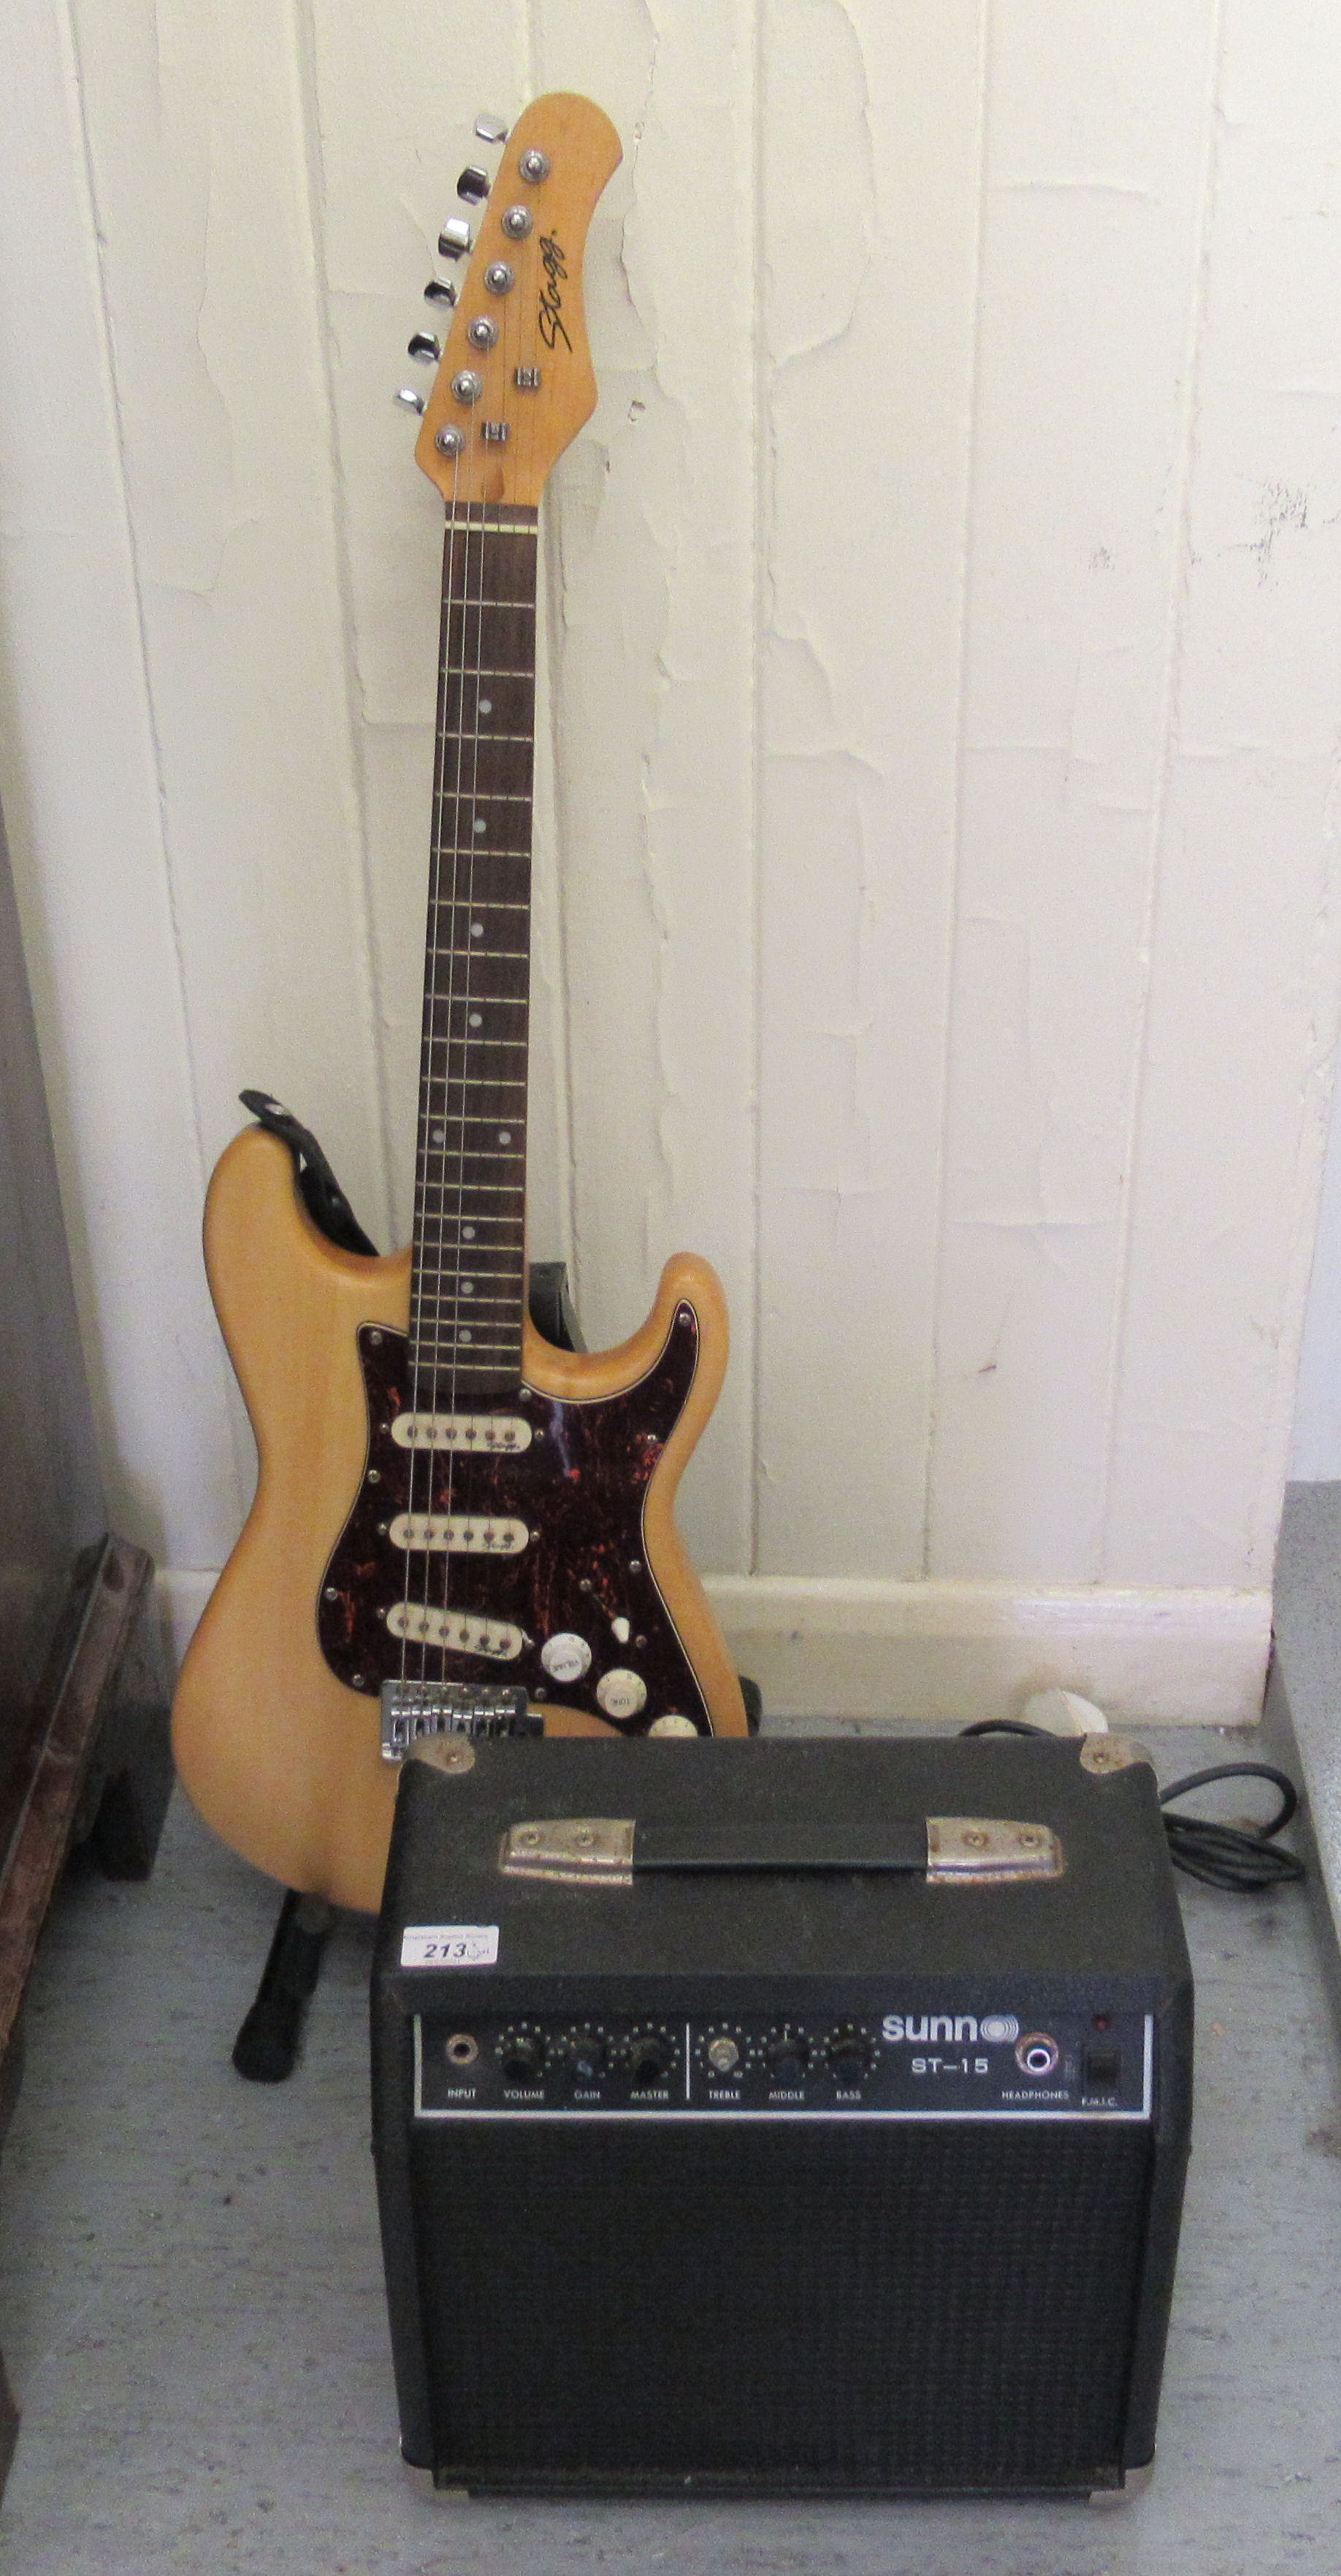 A Stagg electric guitar, on stand; and a Sunn ST-15 amp